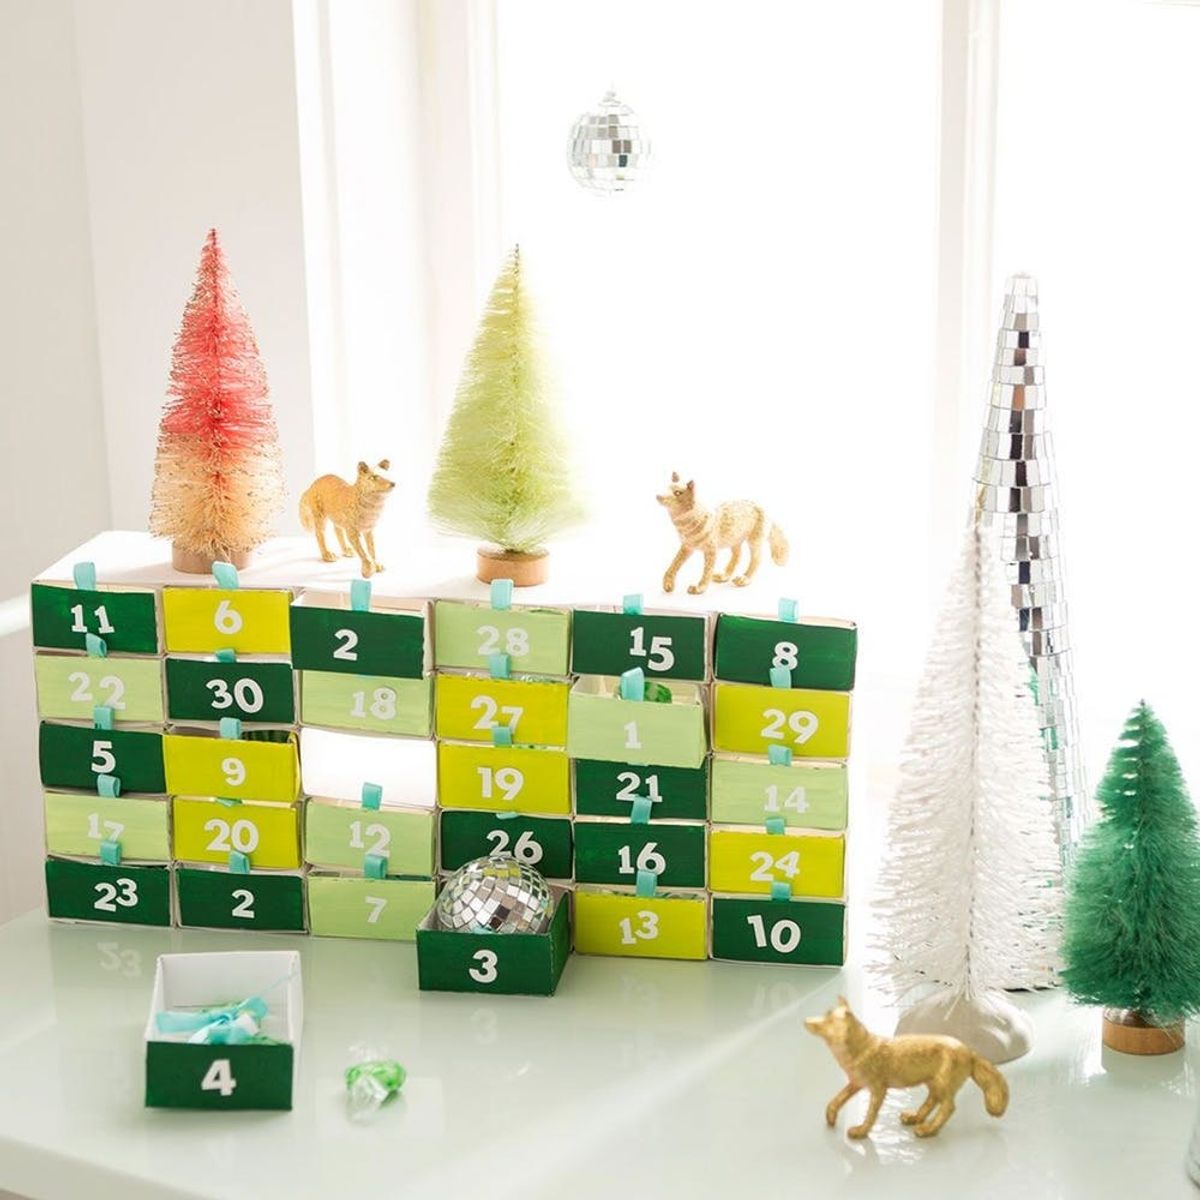 This Winter Calendar Game Is Our New Go-To Family Tradition